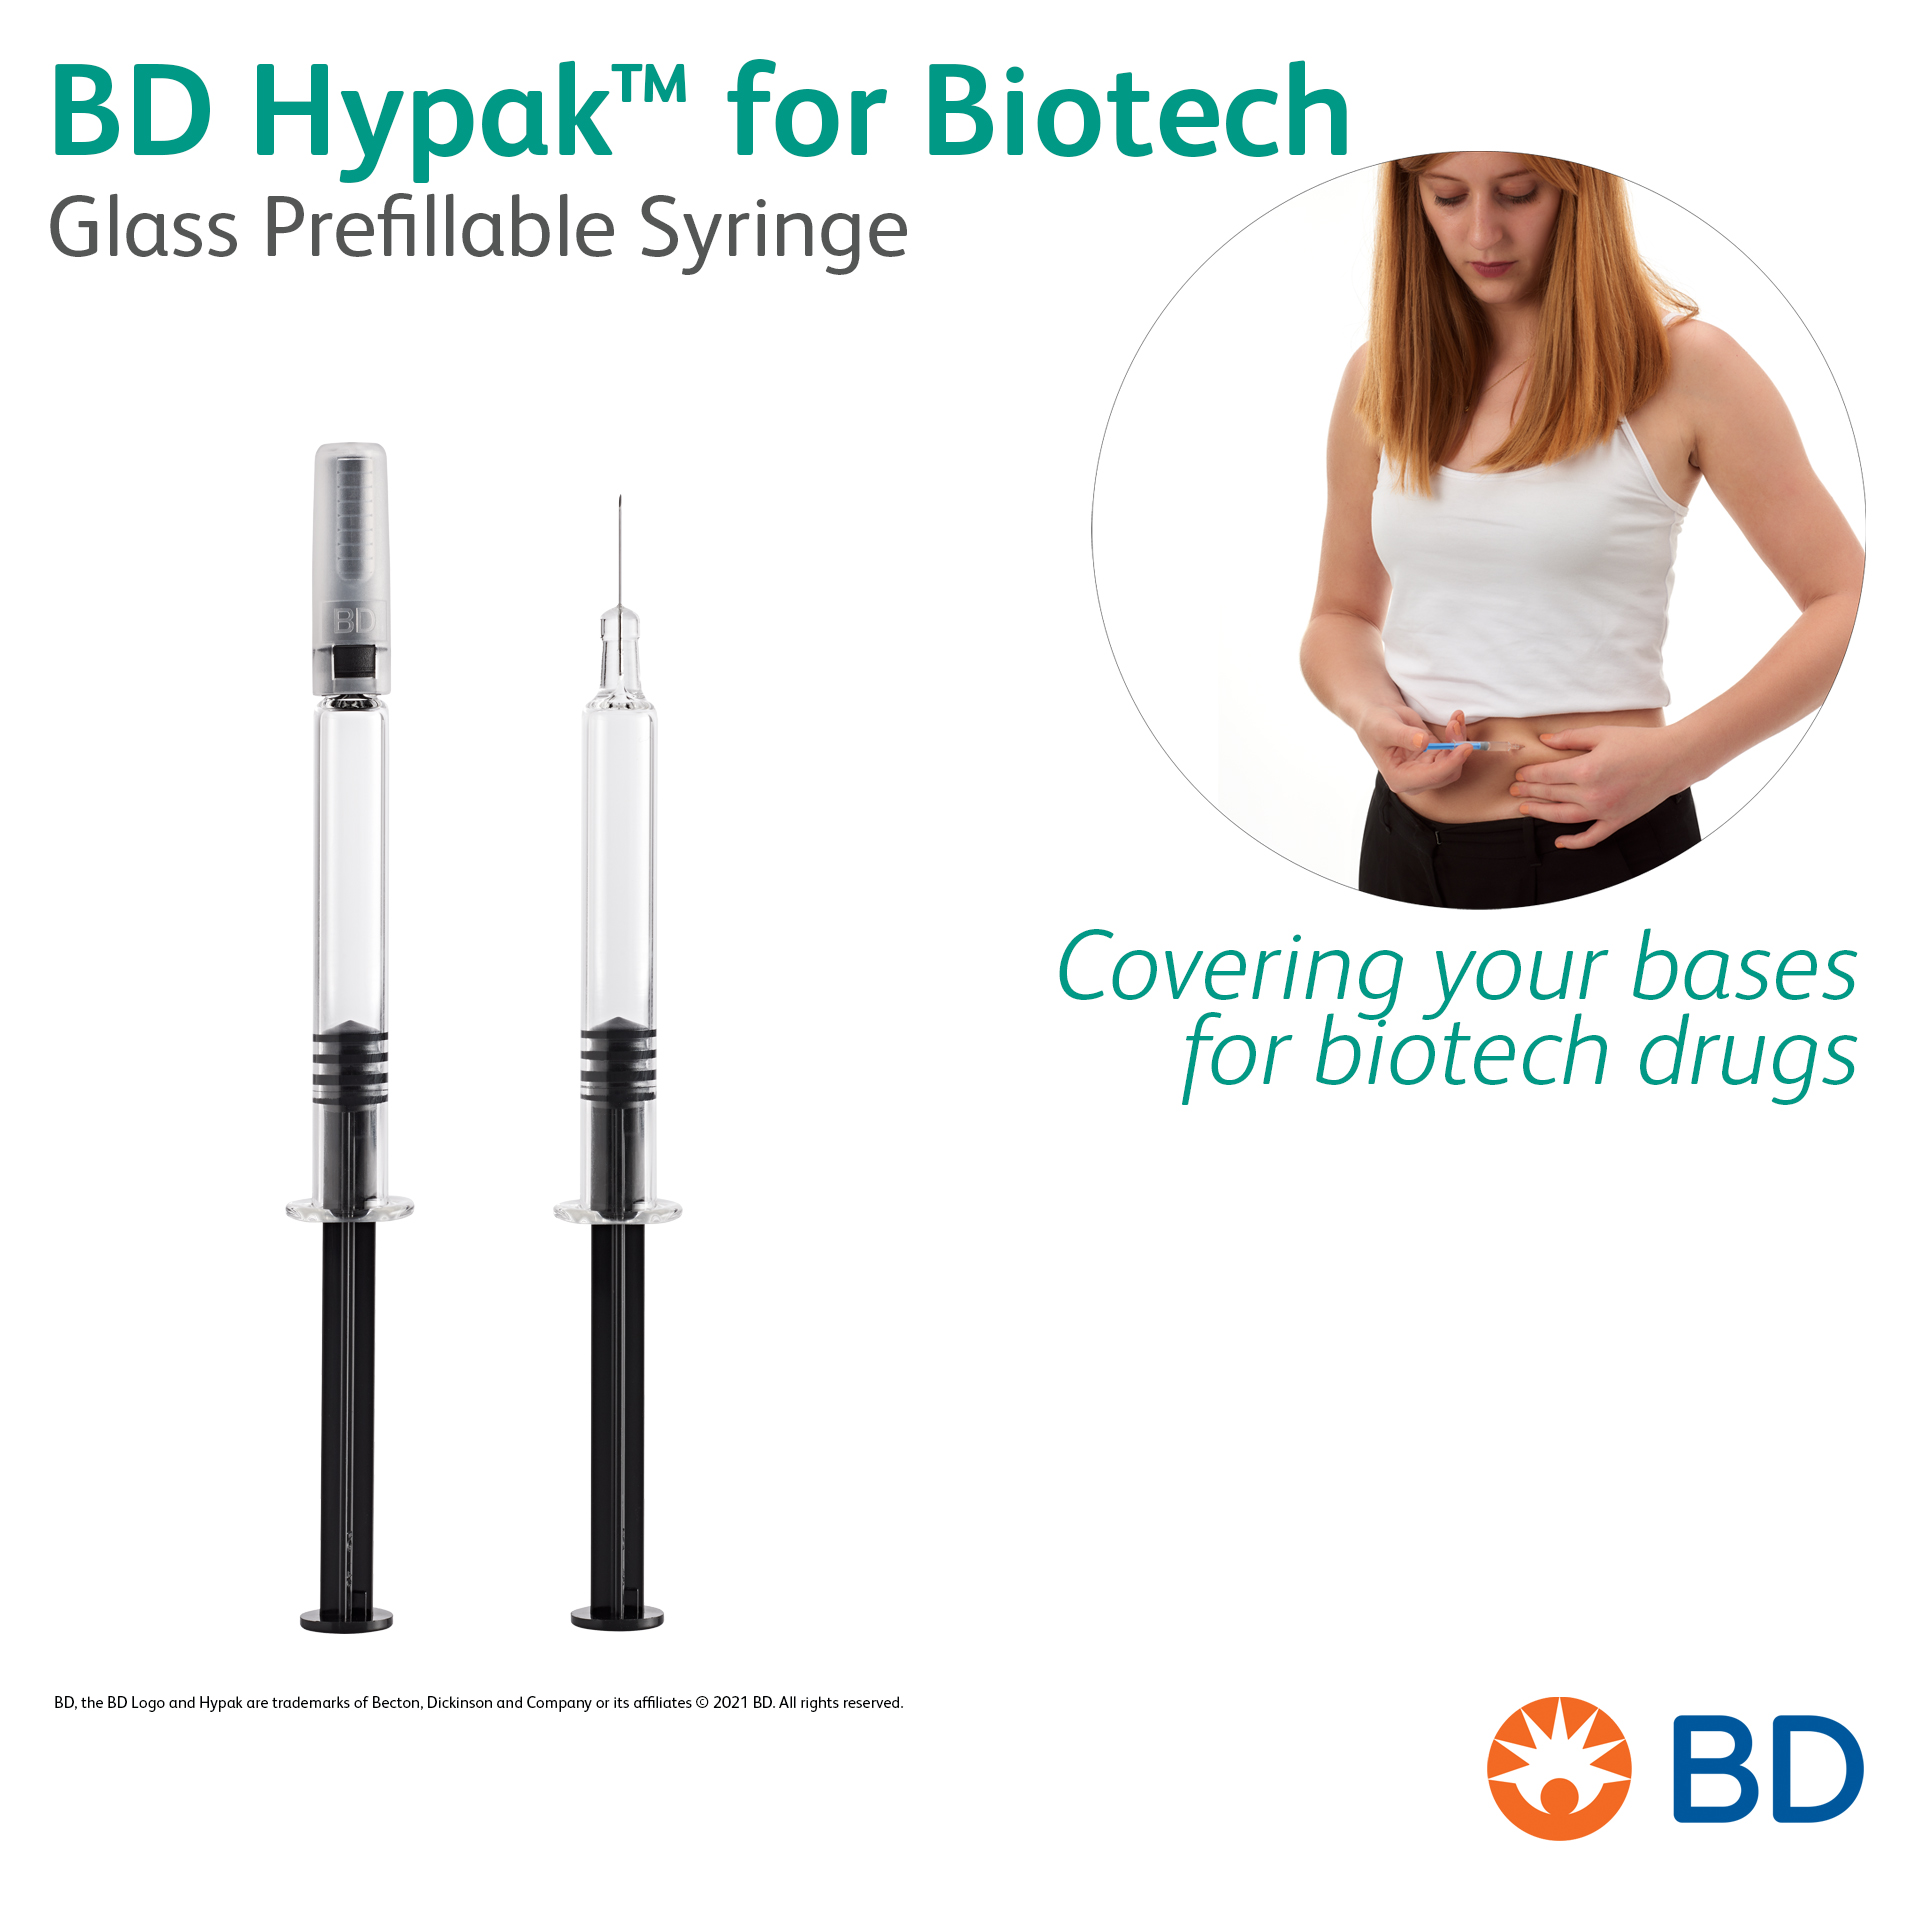 BD Hypak™ for Biotech Glass Prefillable Syringe - Covering your bases for biotech drugs